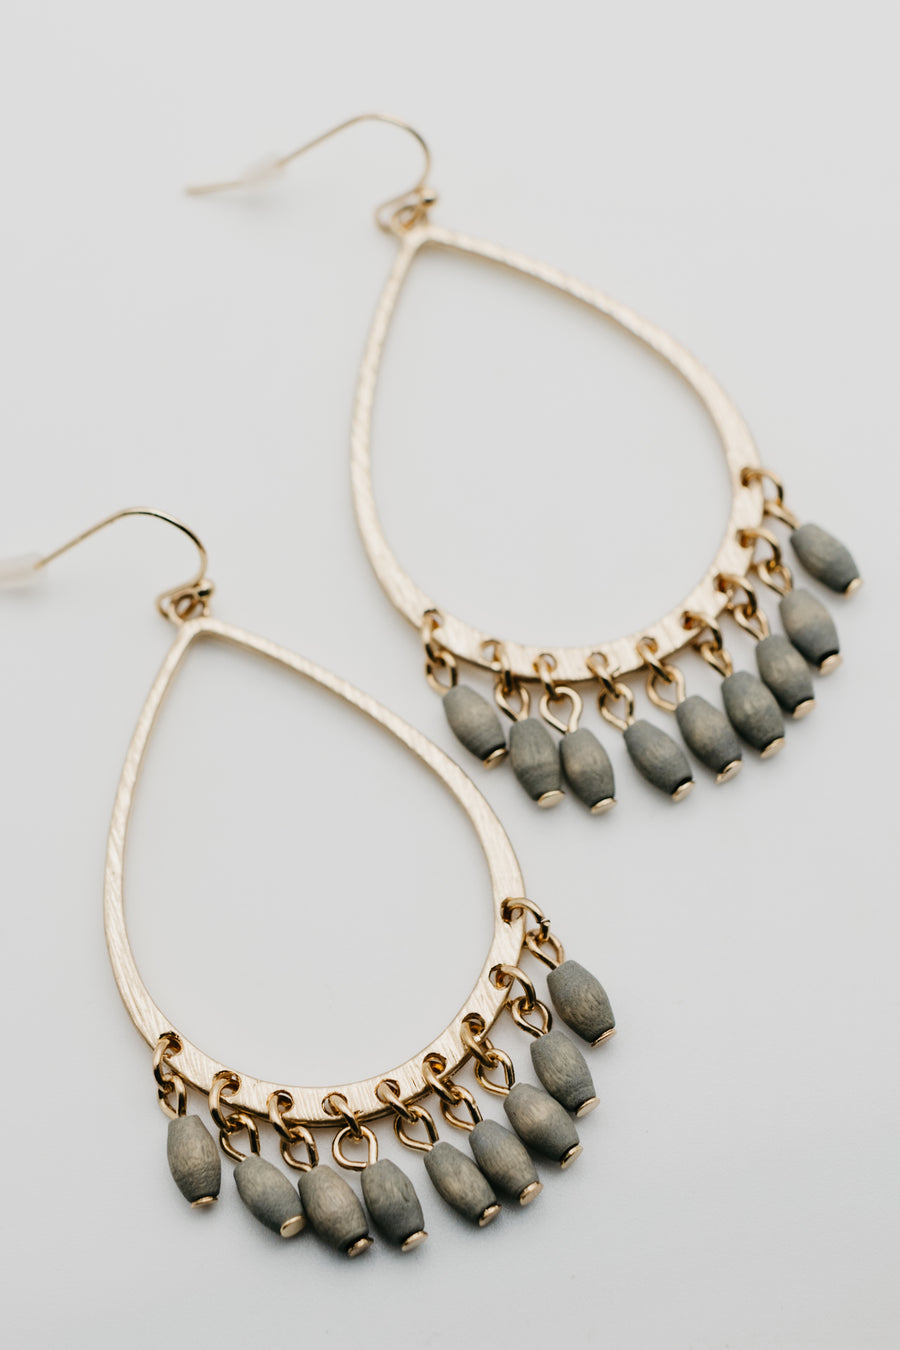 The Wess Beaded Earring